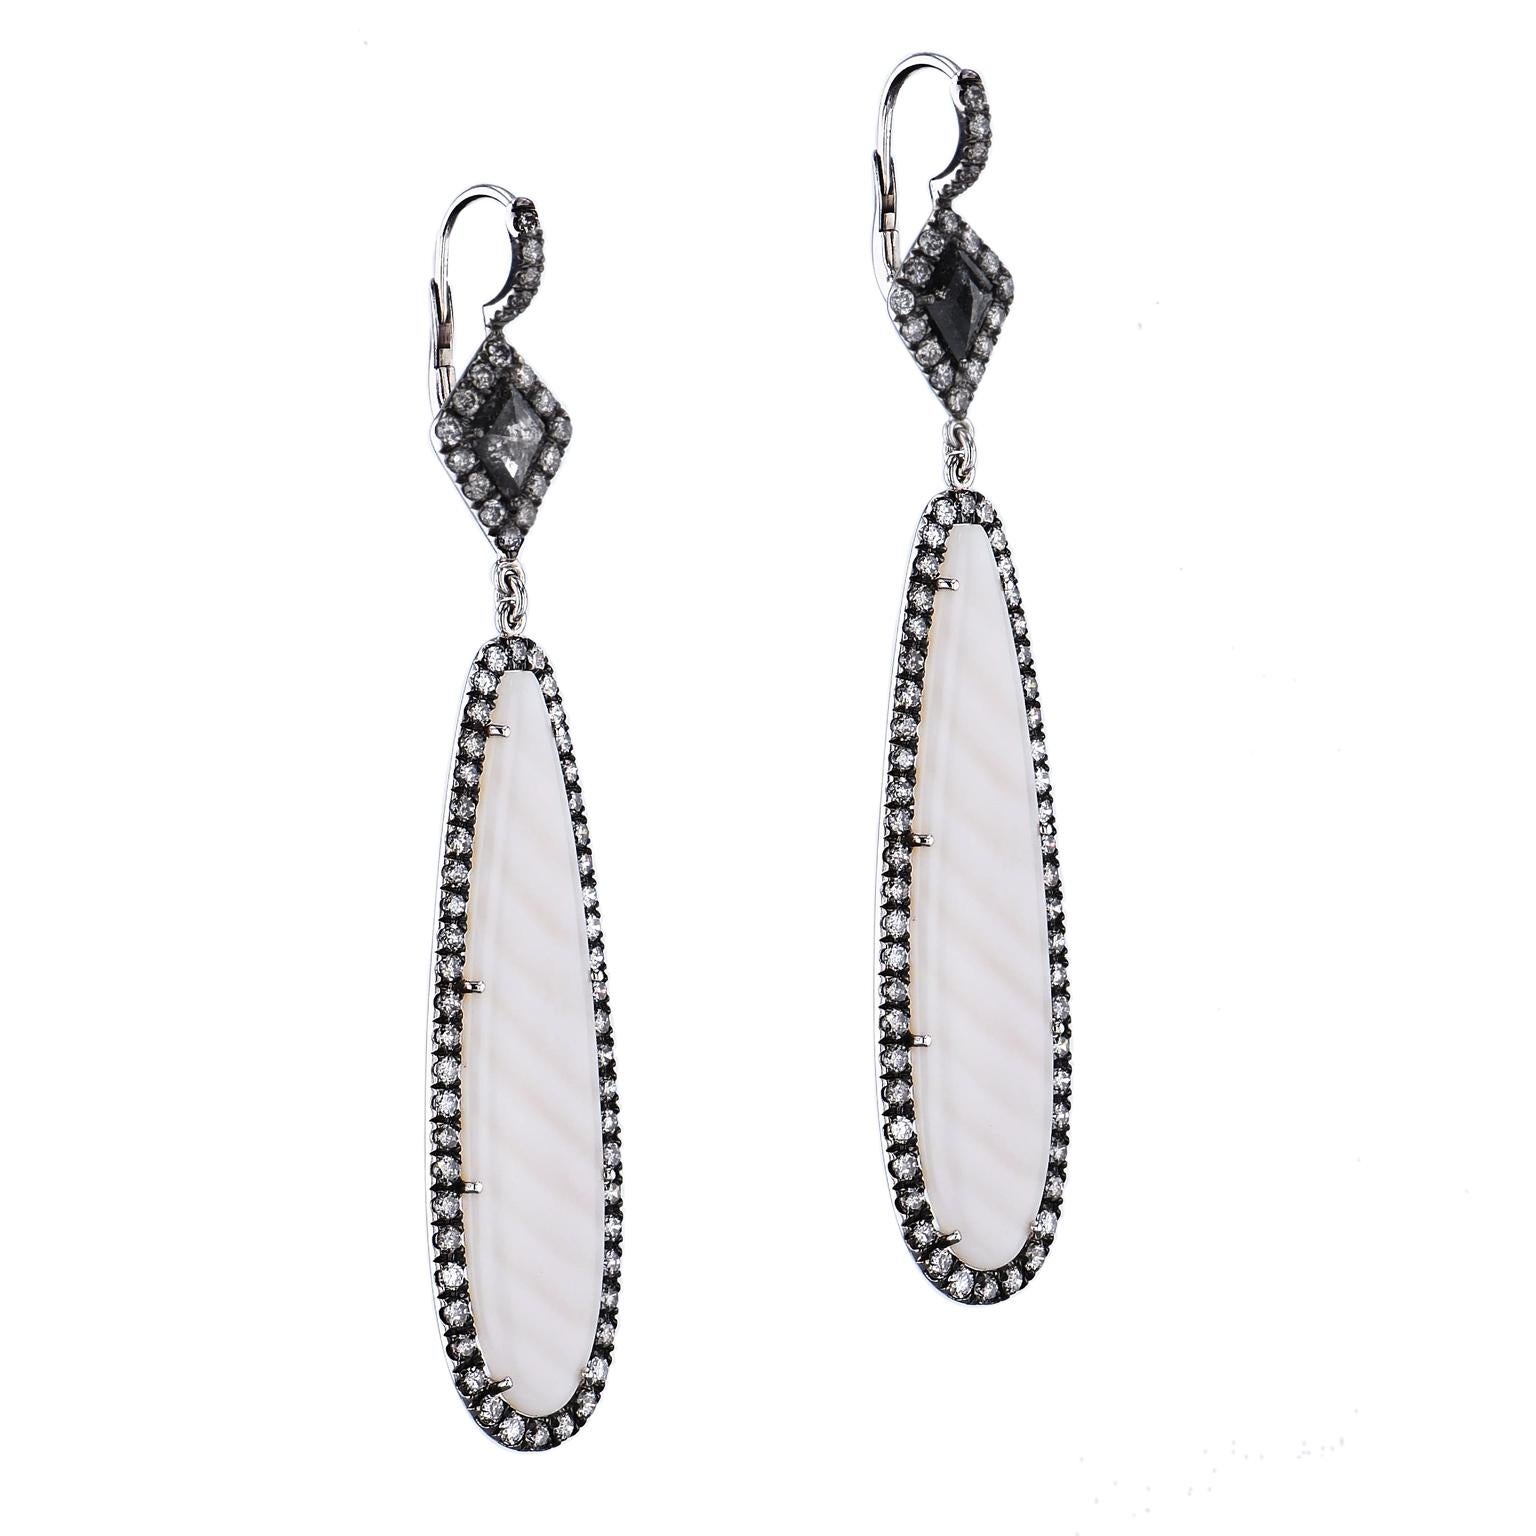 Striped Madagascar Chalcedony Drop Earrings Natural Black Diamond with Pave 

These elegant earrings are one of a kind and handmade by HHJewels.  They are created in 18 karat white gold with striped Chalcedony drops from Madagascar.  Adorning the